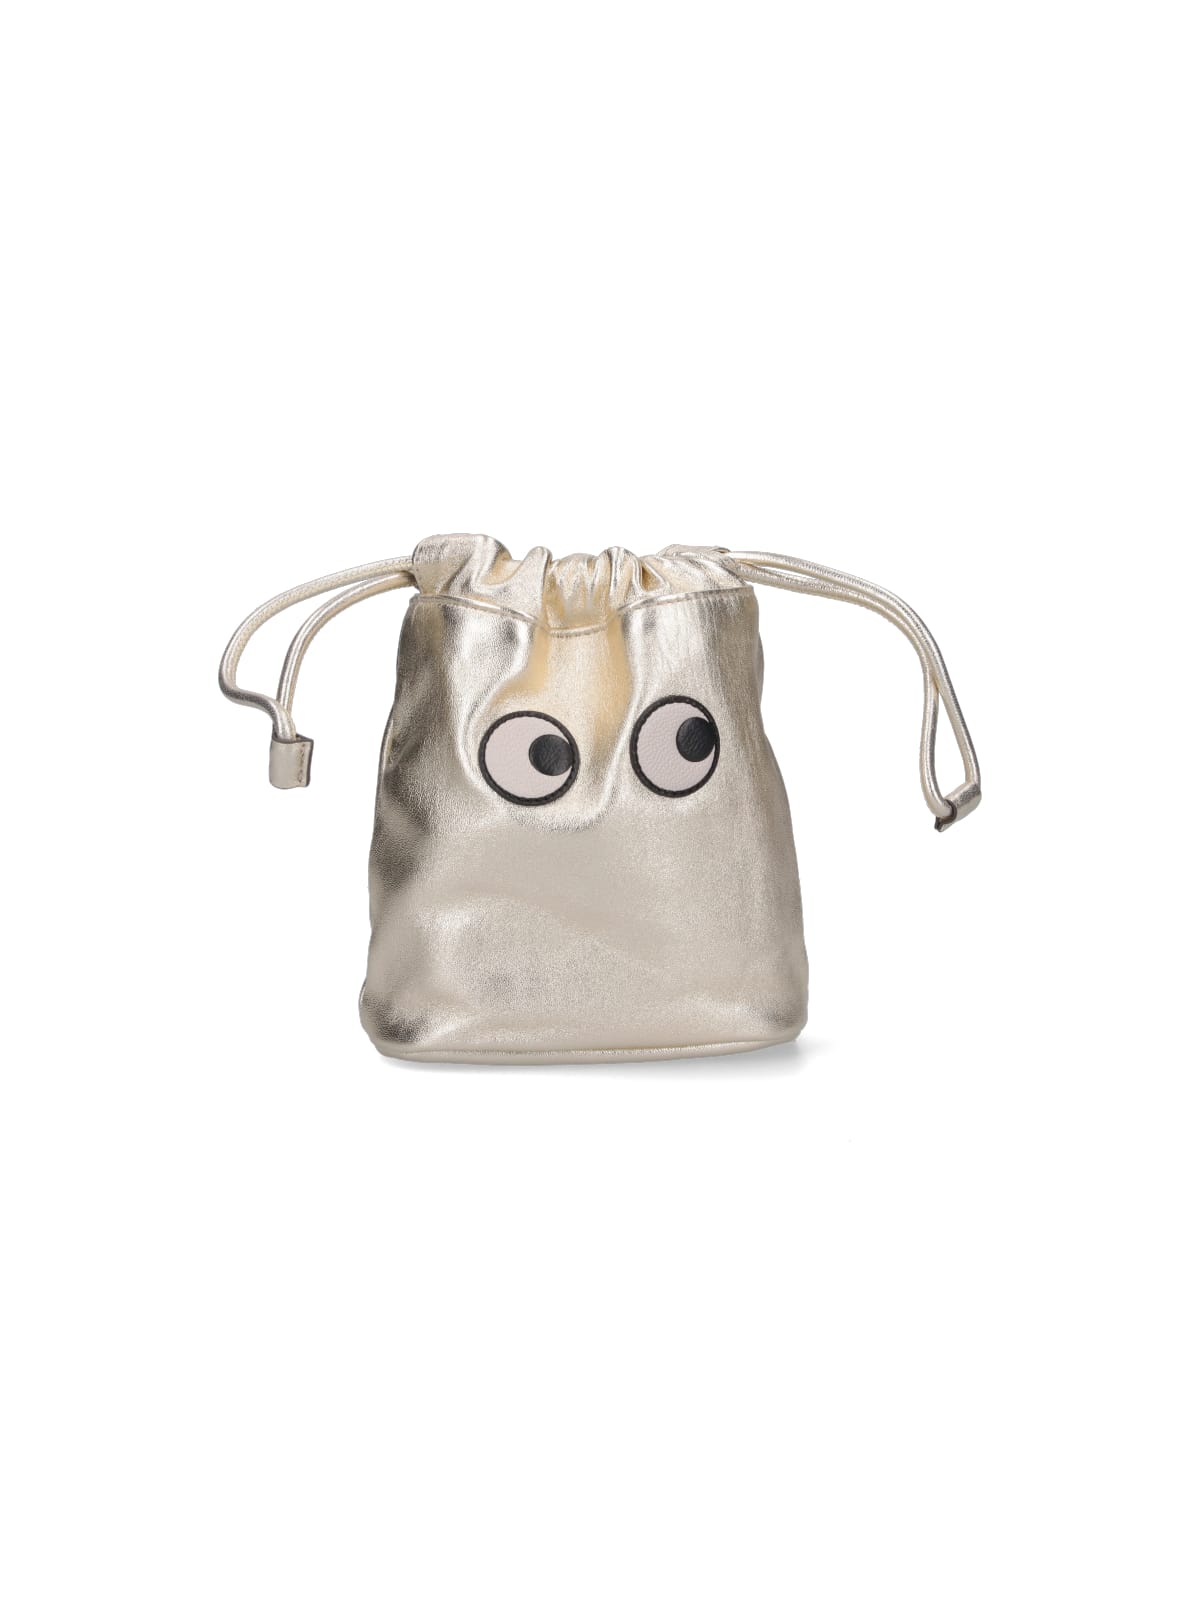 Anya Hindmarch Tote In Cream